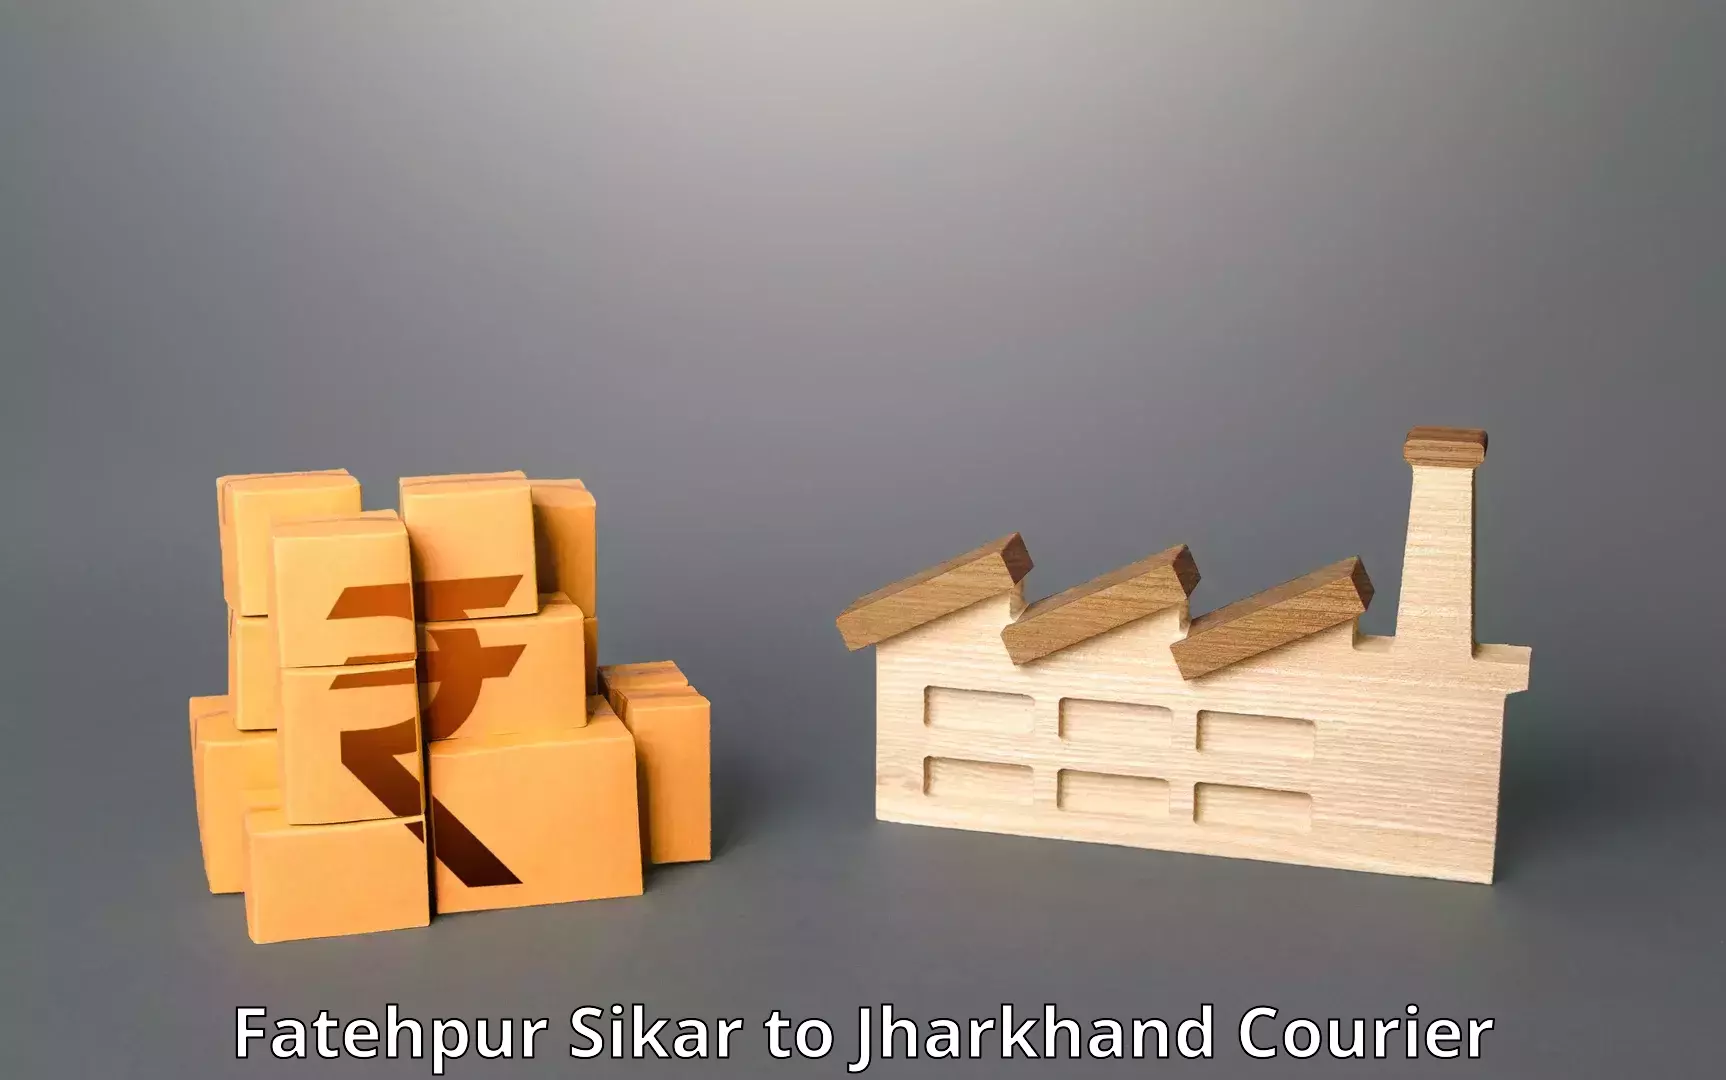 Integrated shipping solutions Fatehpur Sikar to Kedla